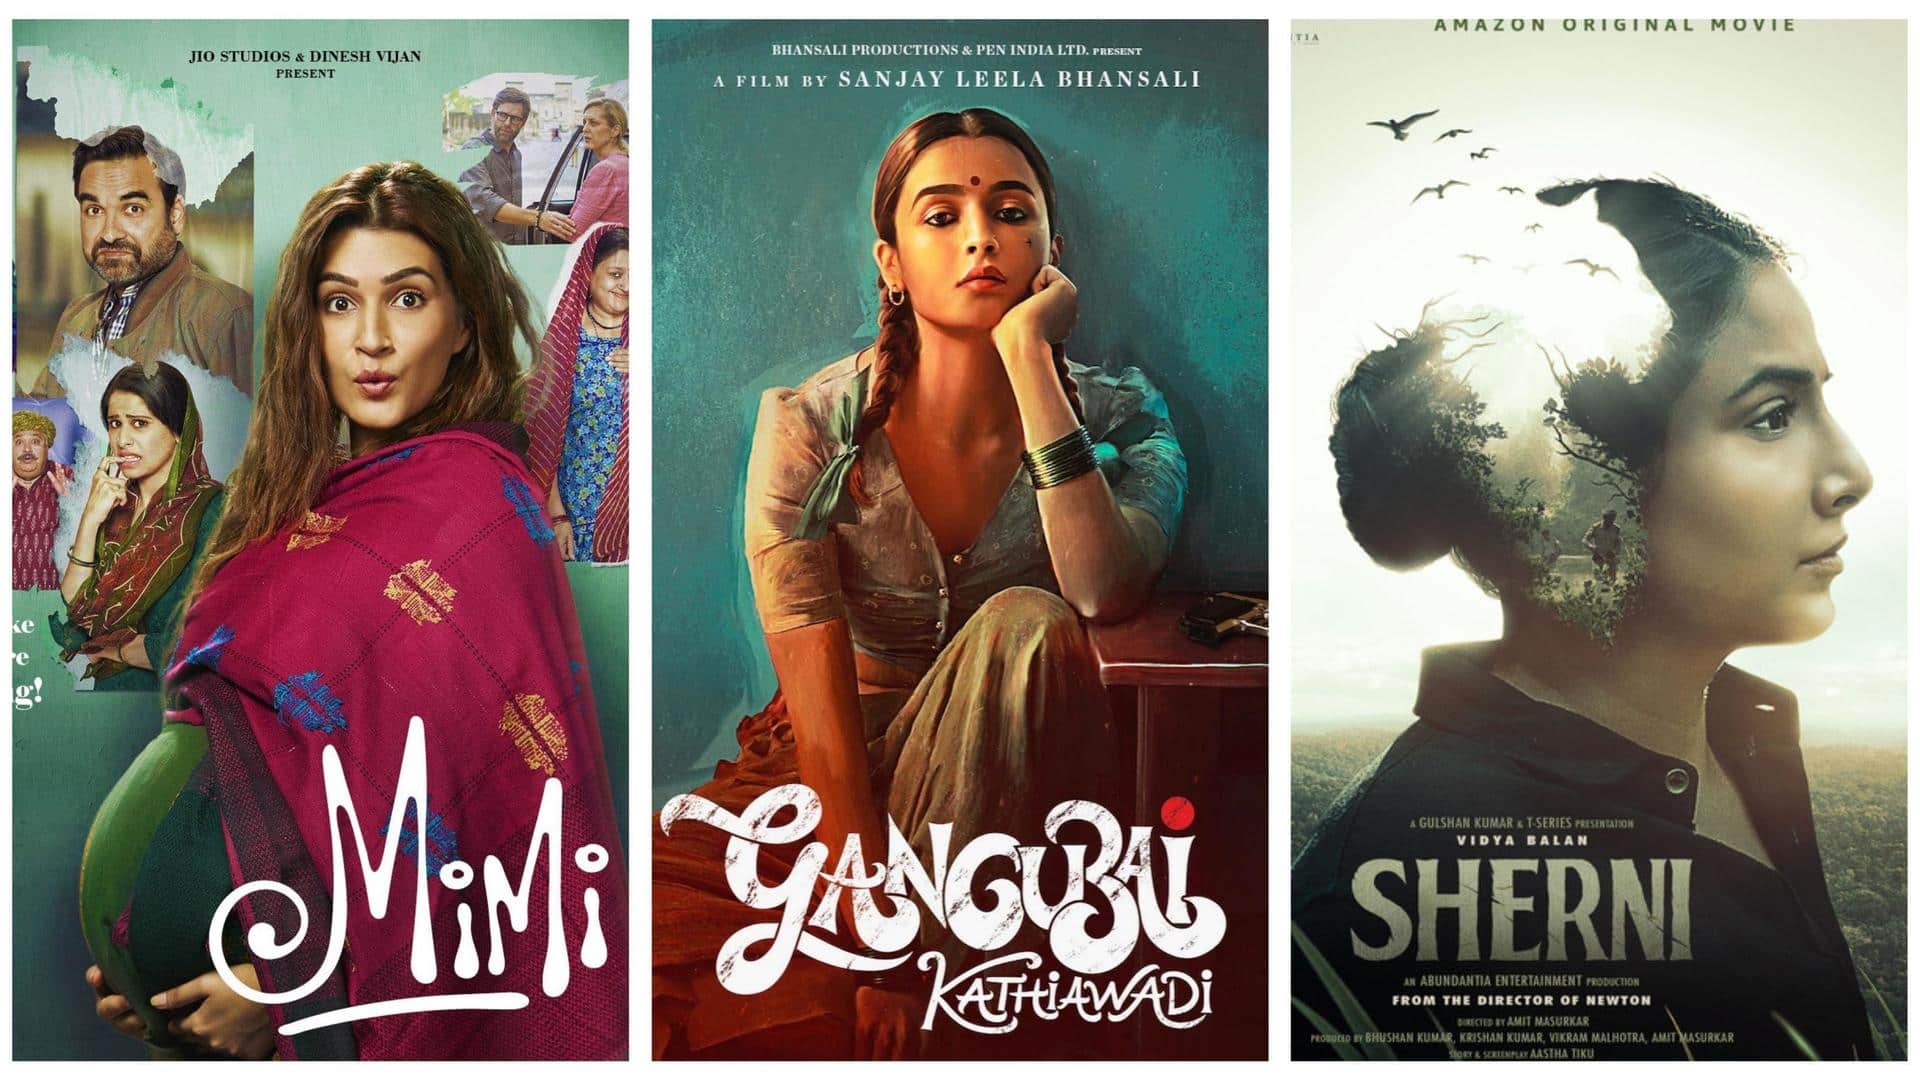 Looking at 5 recent and impactful female-led Bollywood films